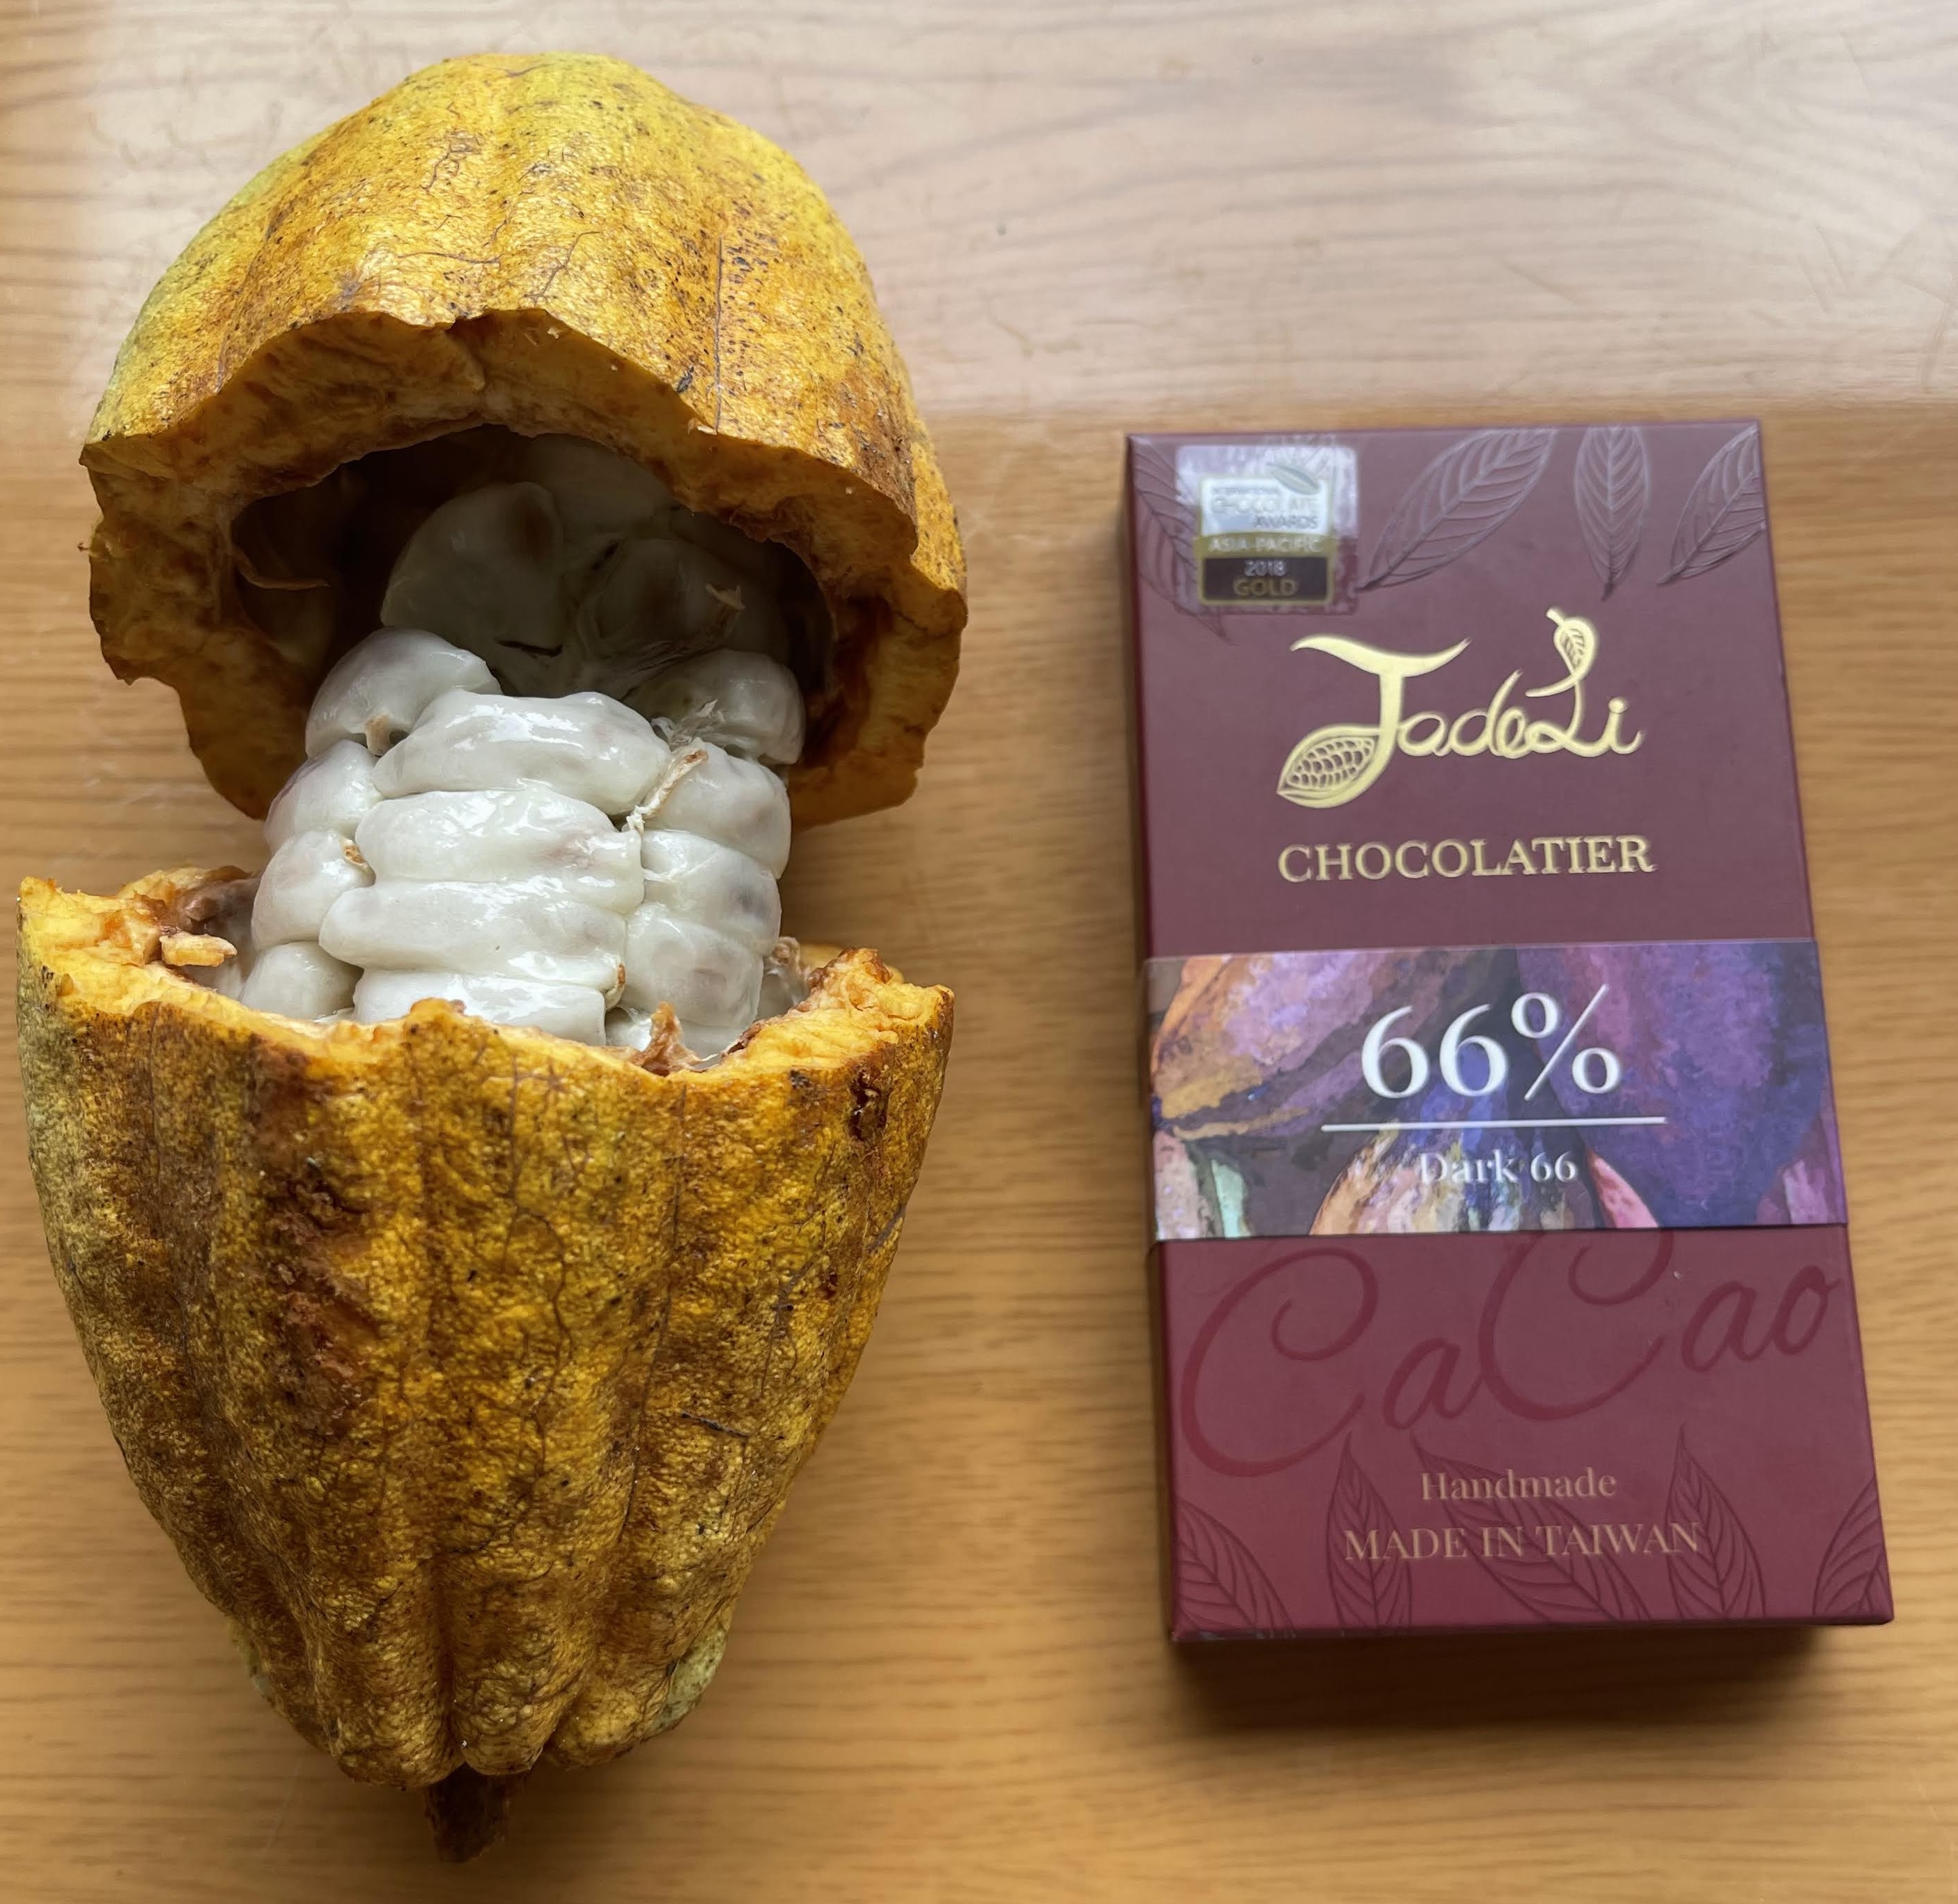 A ripe yellow cacao pod broken open to reveal the white flesh, next to a dark red chocolate bar made from the bean.